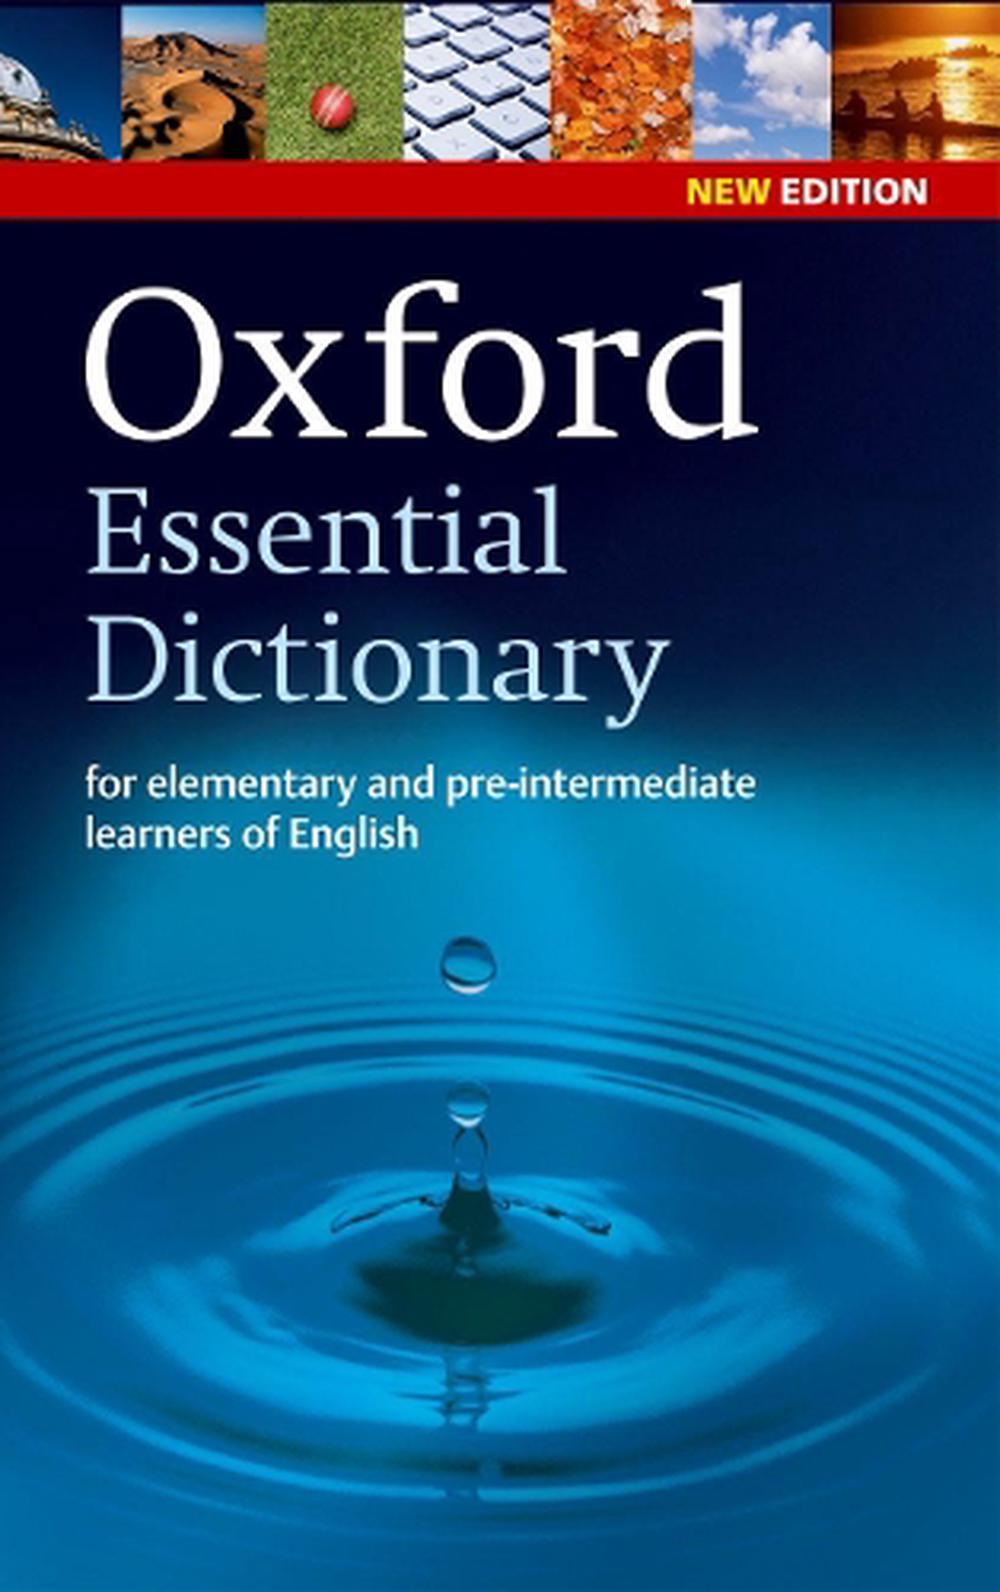 Essential　online　by　Oxford　Edition　Buy　The　Paperback,　Dictionary,　at　Dictionary,　Oxford　9780194333993　New　Nile